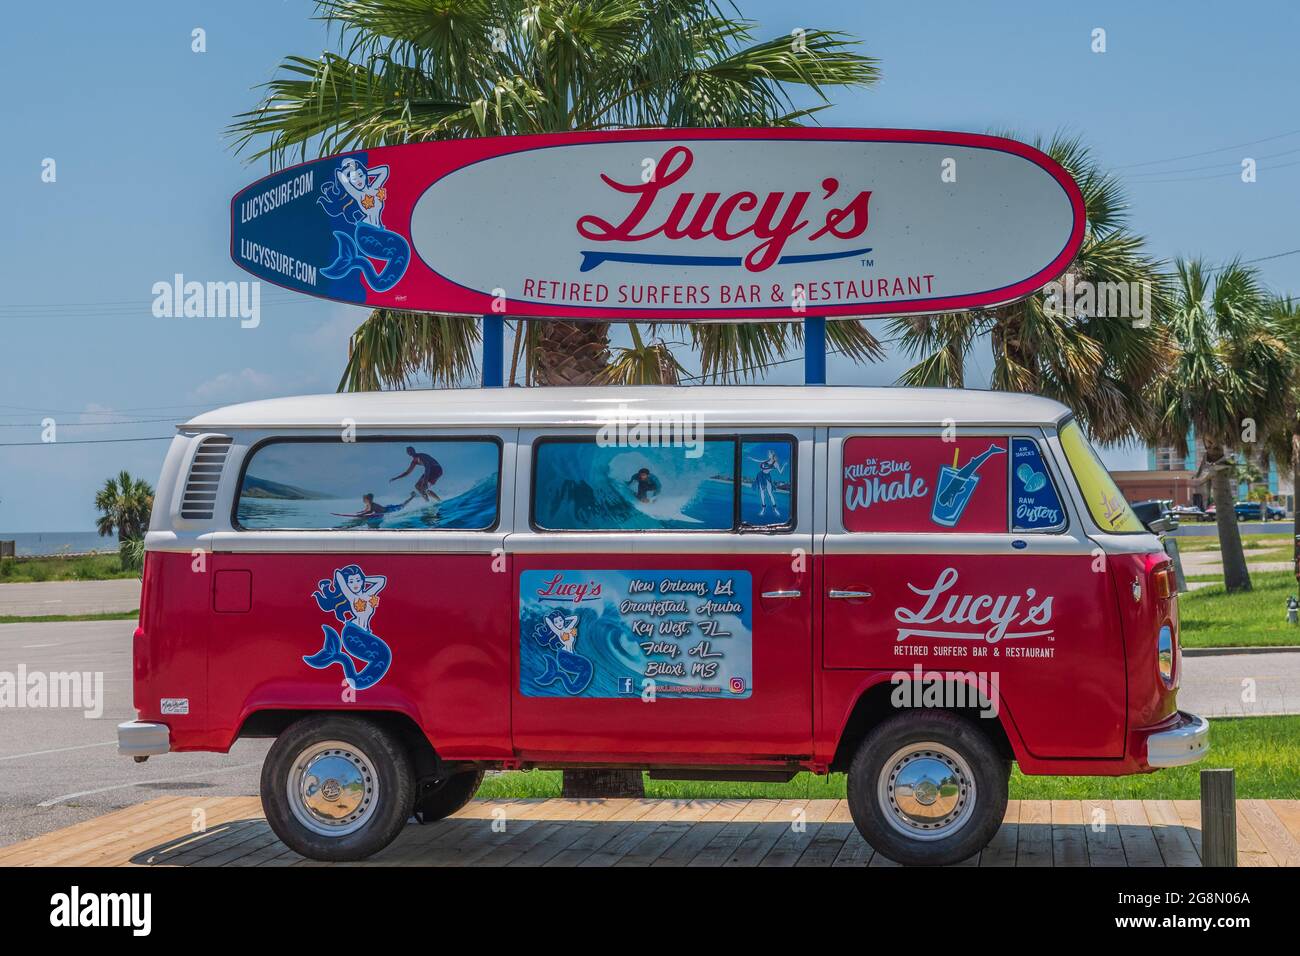 Lucy's Retired Surfers Bar and Restaurant in Biloxi, Mississippi, USA Stock Photo